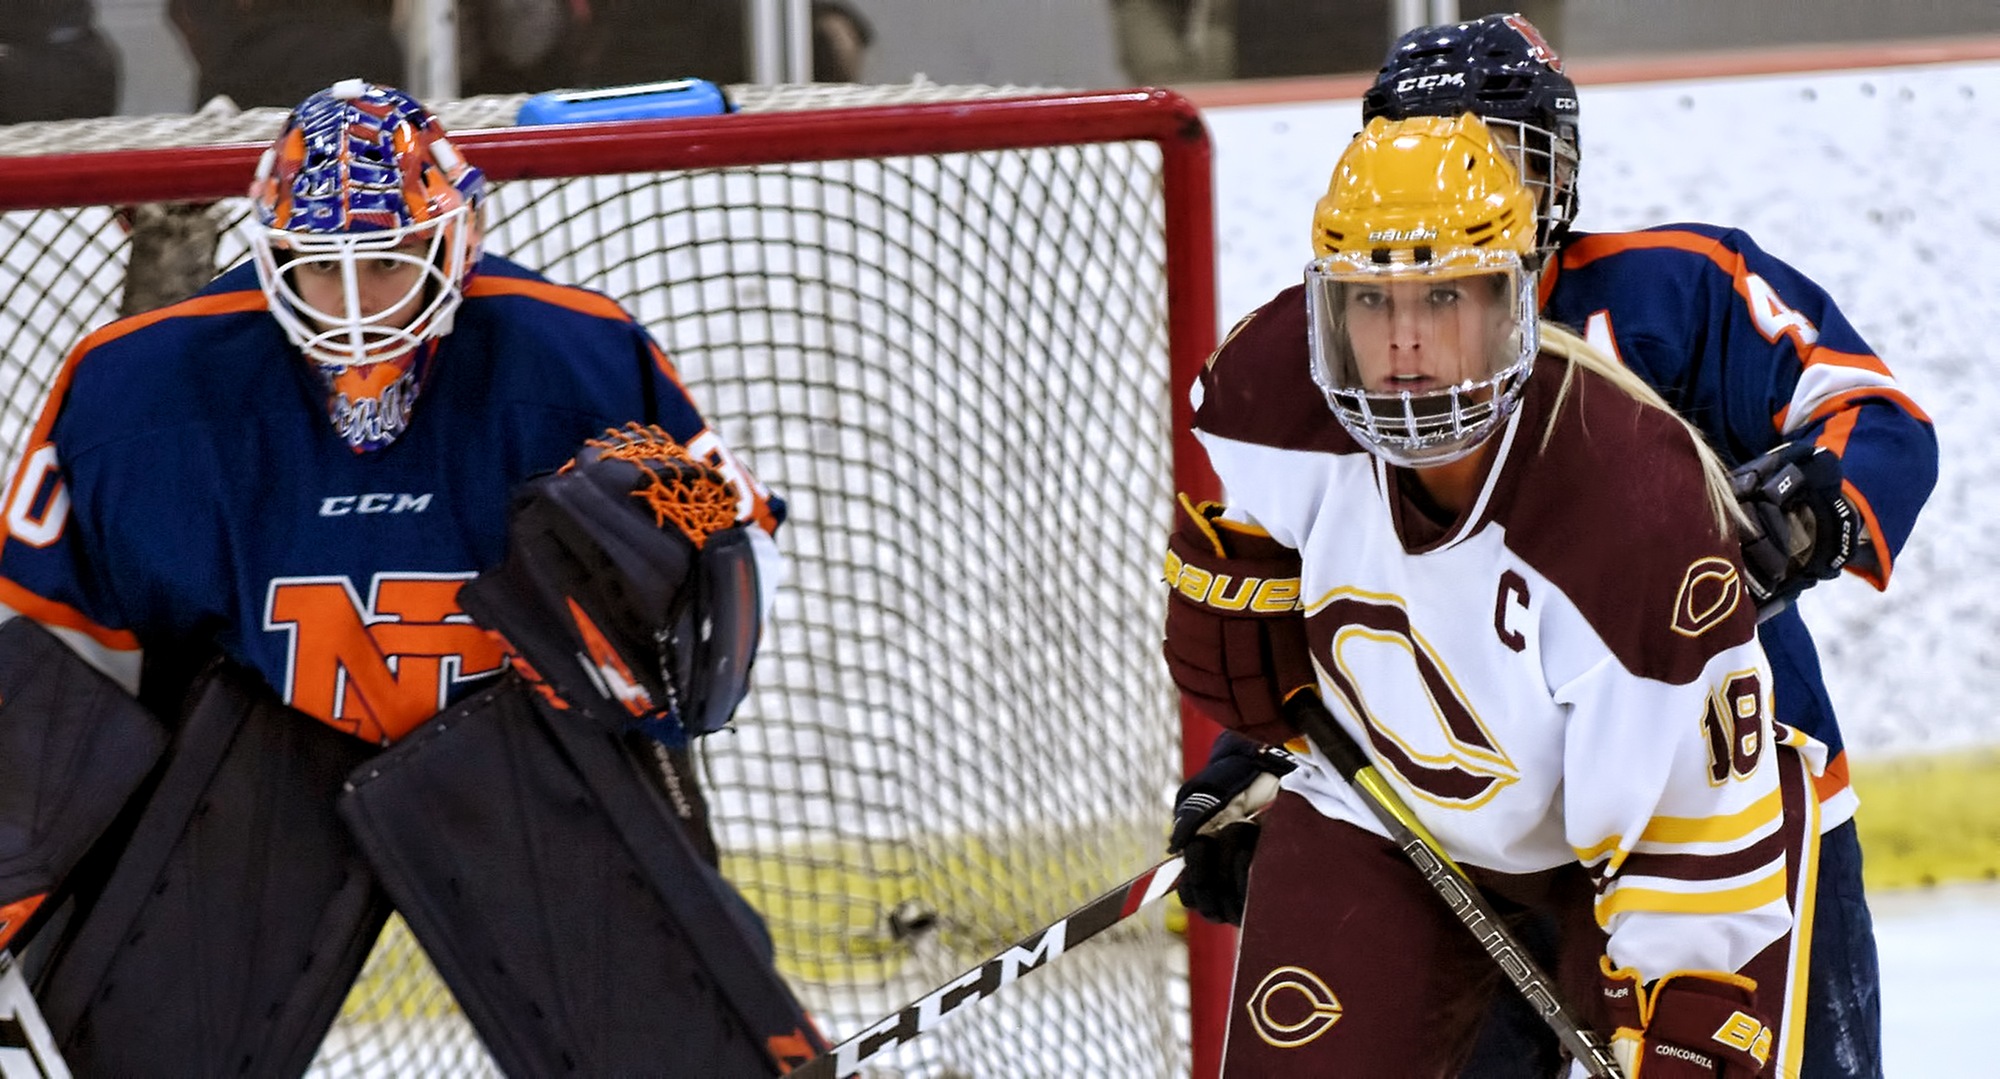 Senior captain Ally Wiitala camps in front of the Northland goal during the first period of the Cobbers' OT win. Wiitala scored the game winner.